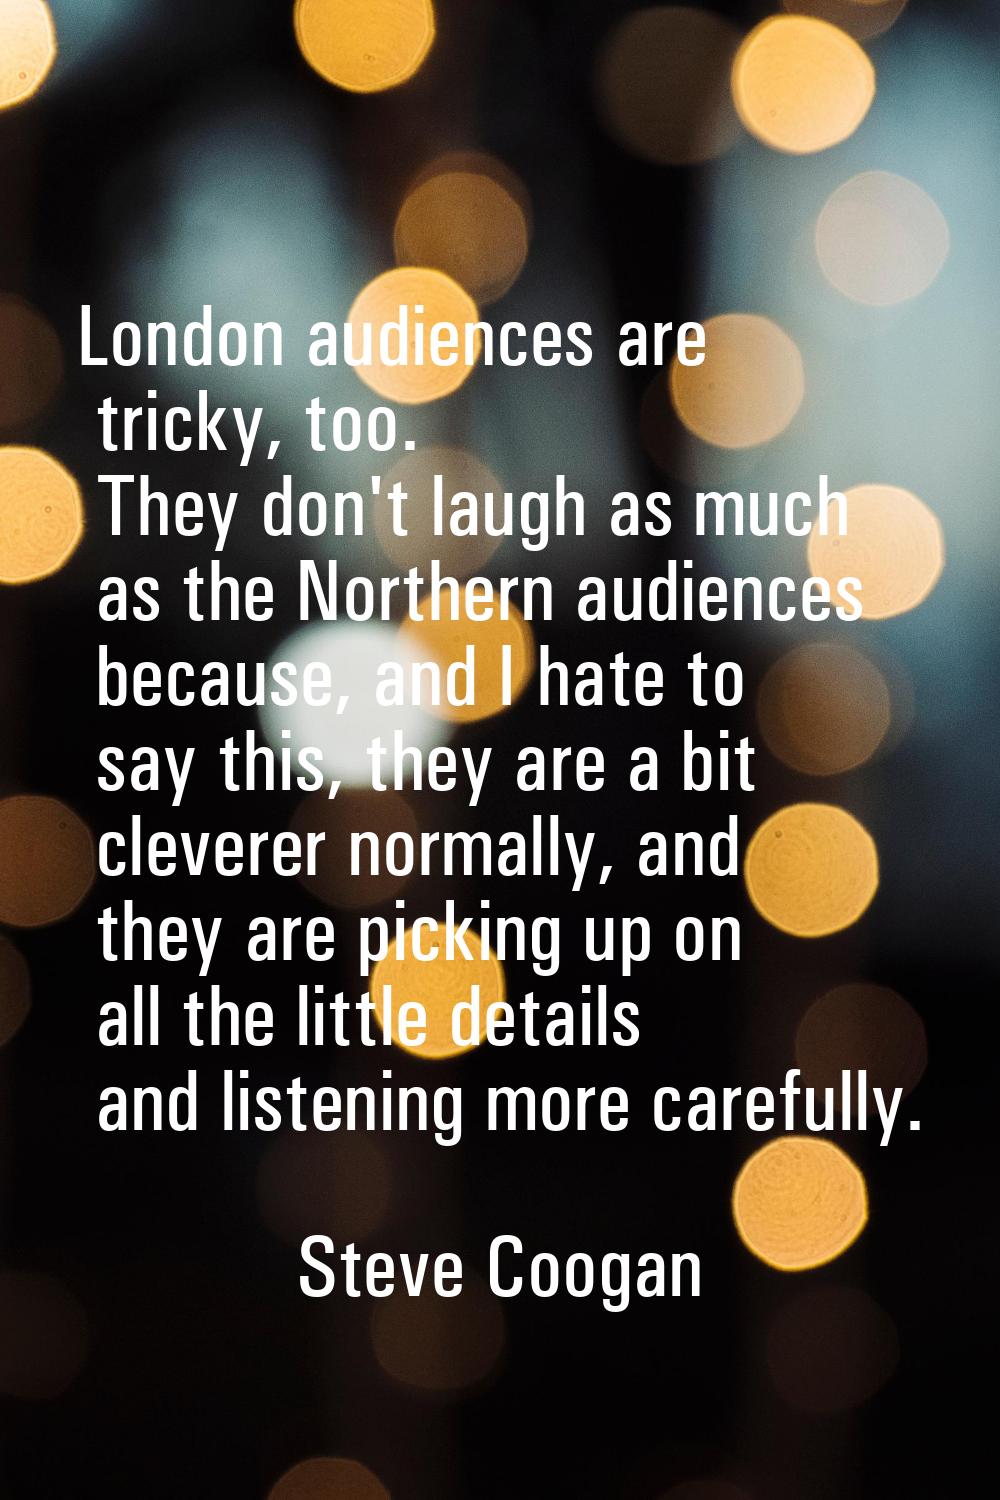 London audiences are tricky, too. They don't laugh as much as the Northern audiences because, and I